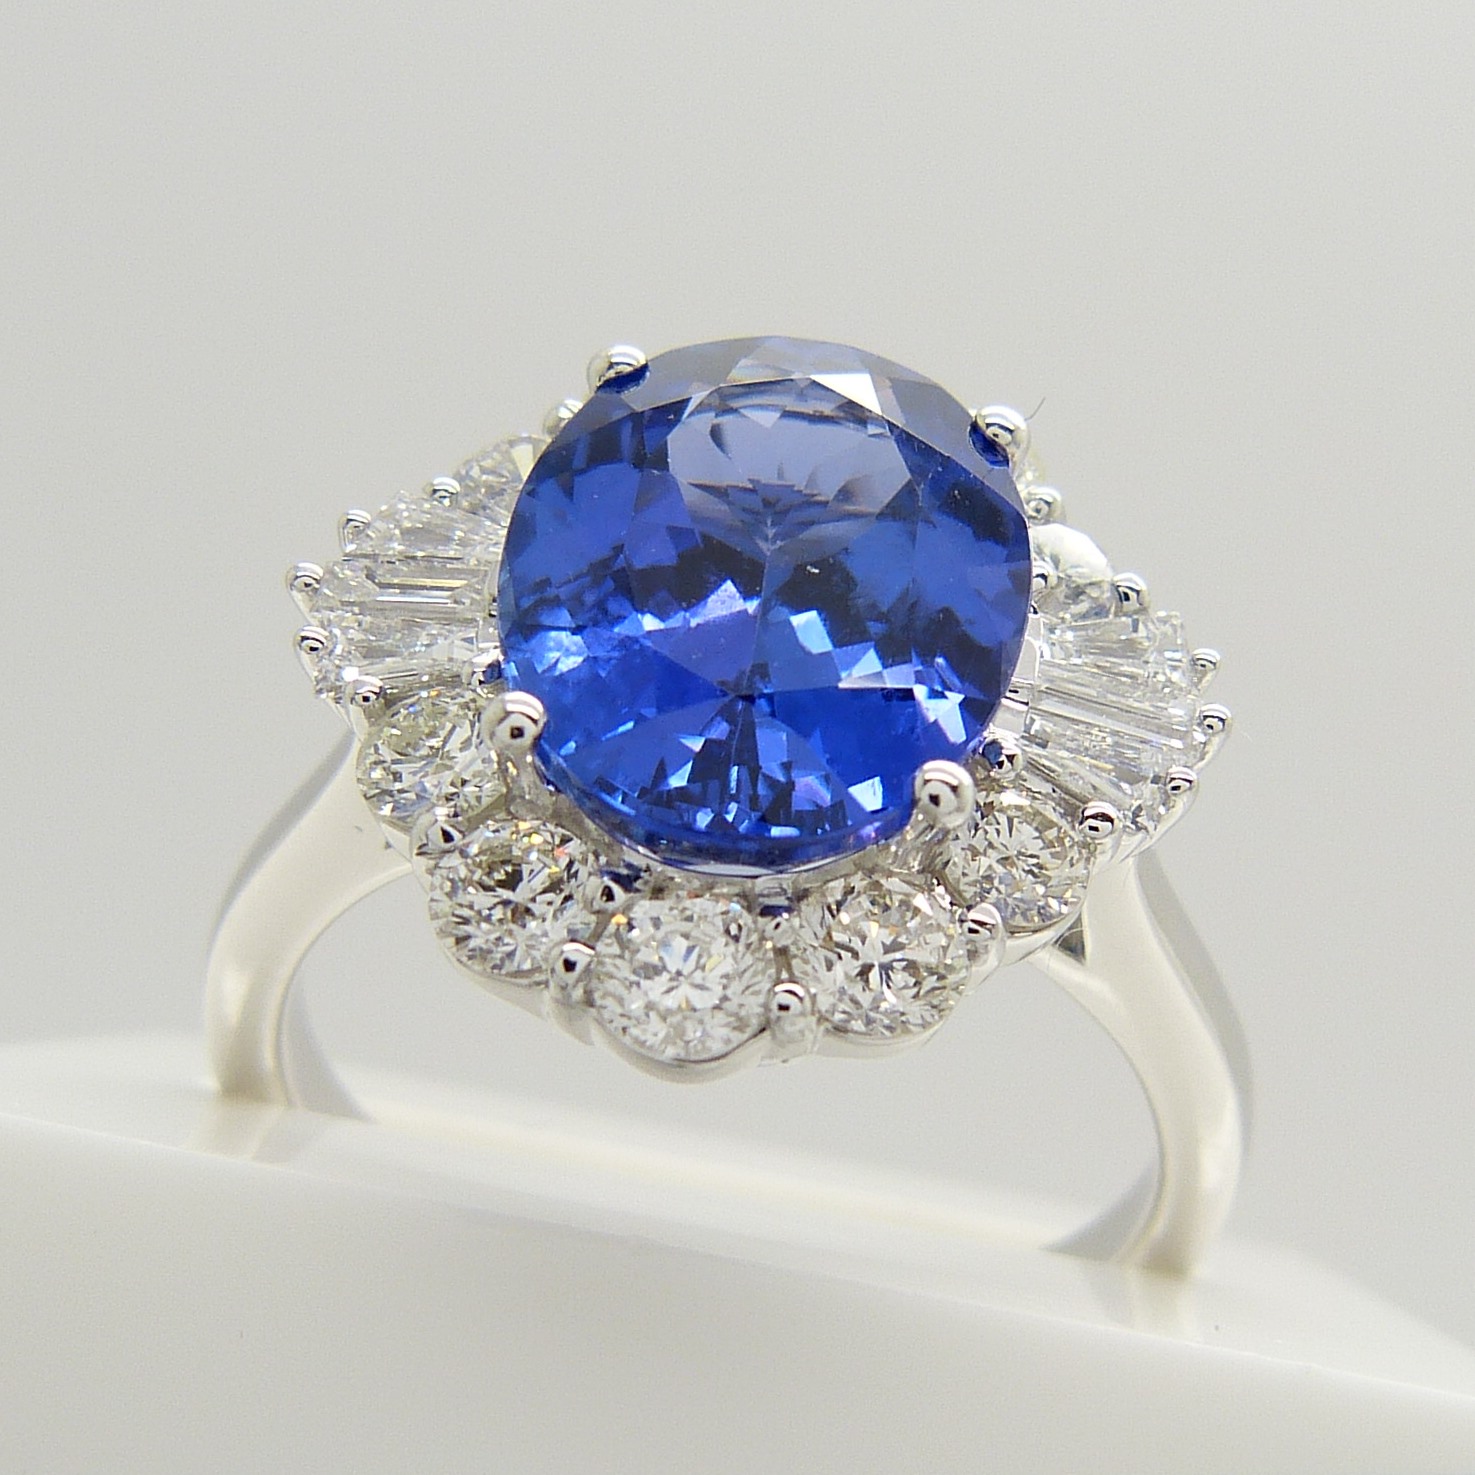 A stunning, certificated loupe-clean large tanzanite and diamond statement ring in 18ct white gold - Image 8 of 9